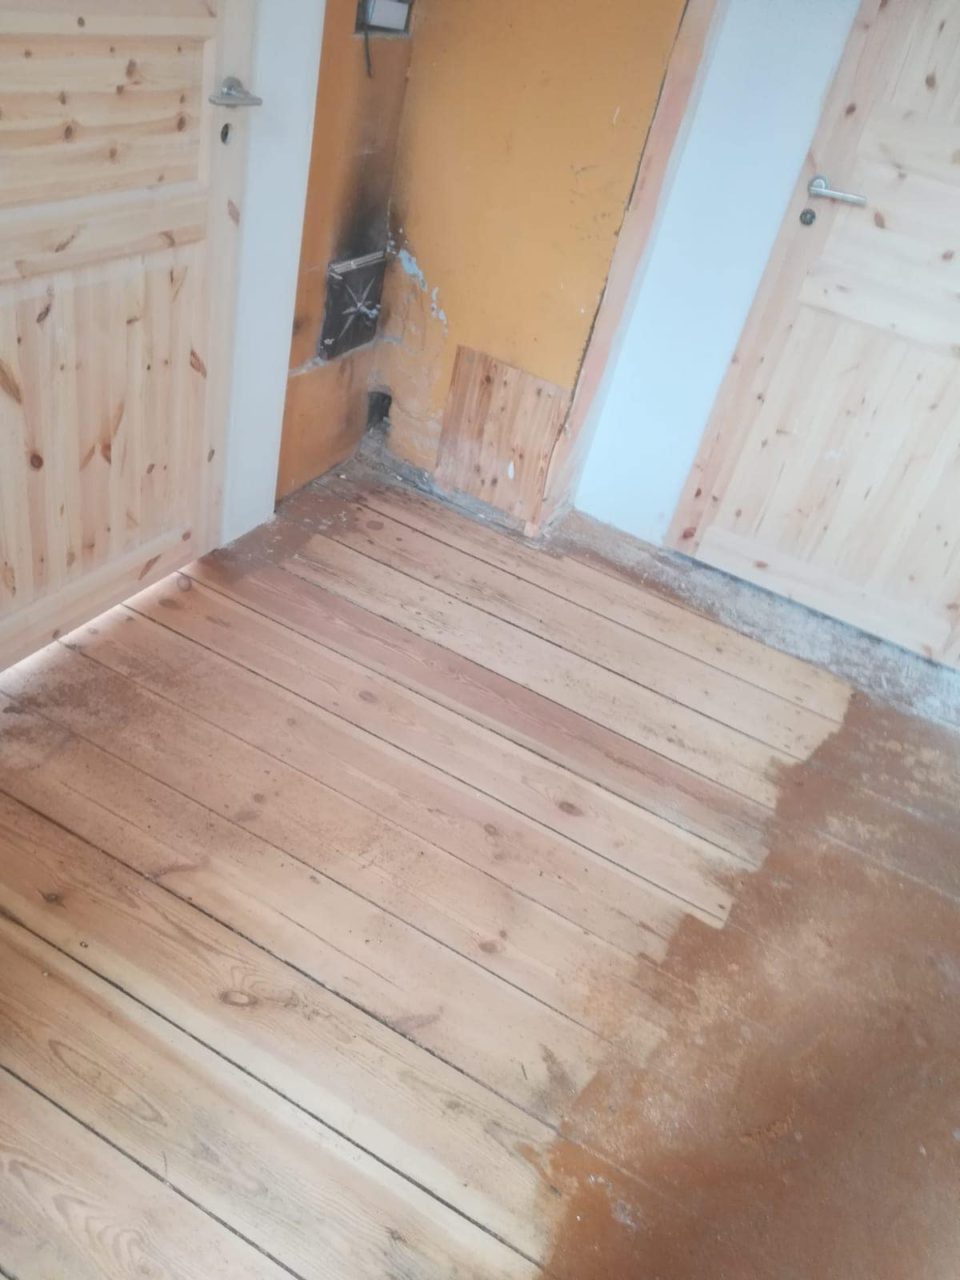 Cleaning and refinishing a painted plank floor? Yes, of course!